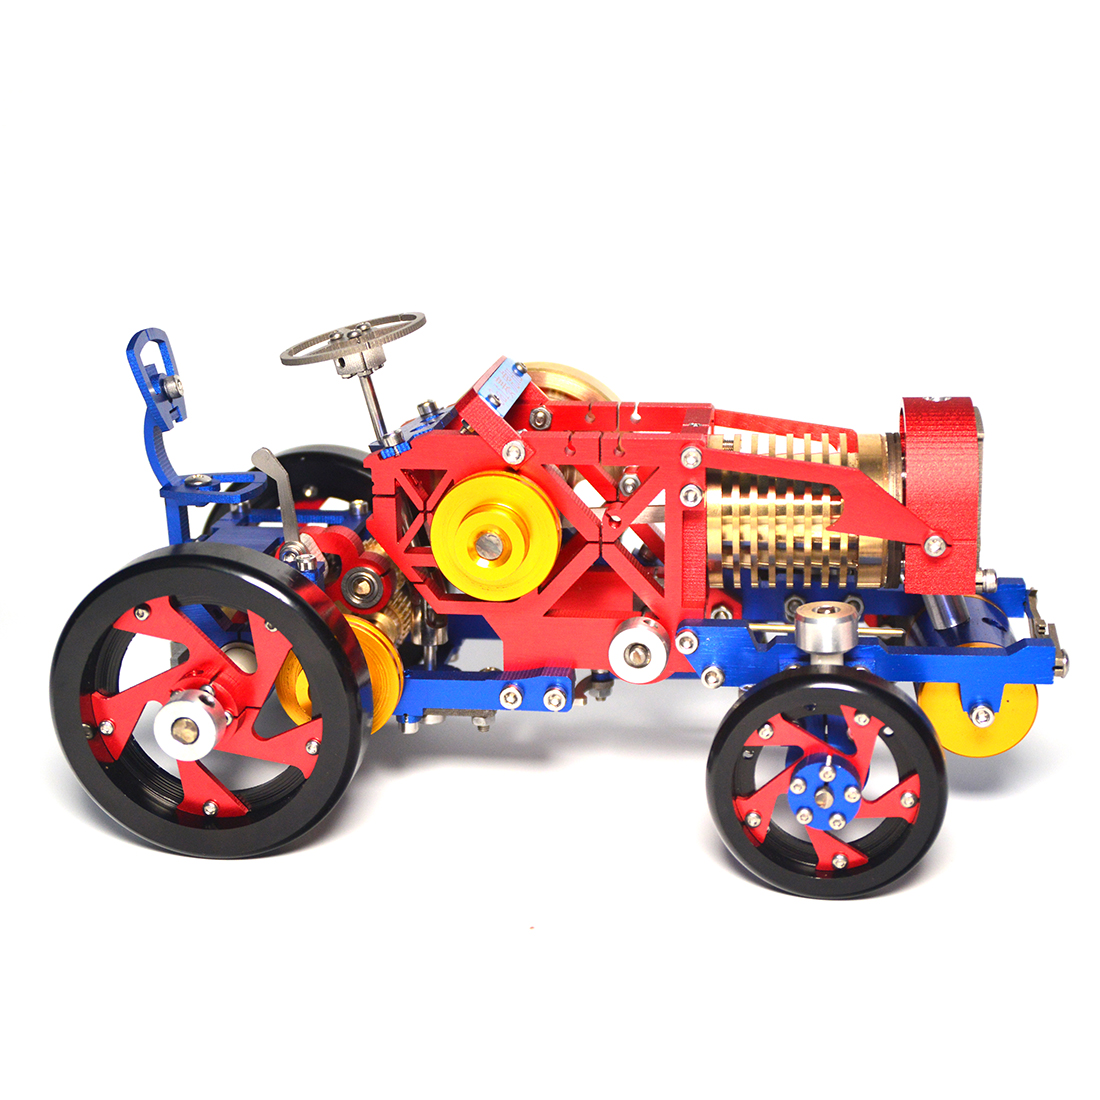 NFSTRIKE Vacuum Suction Fire Type Metal Stirling Engine Tractor Model Christmas Gifts 2019 New Arrival